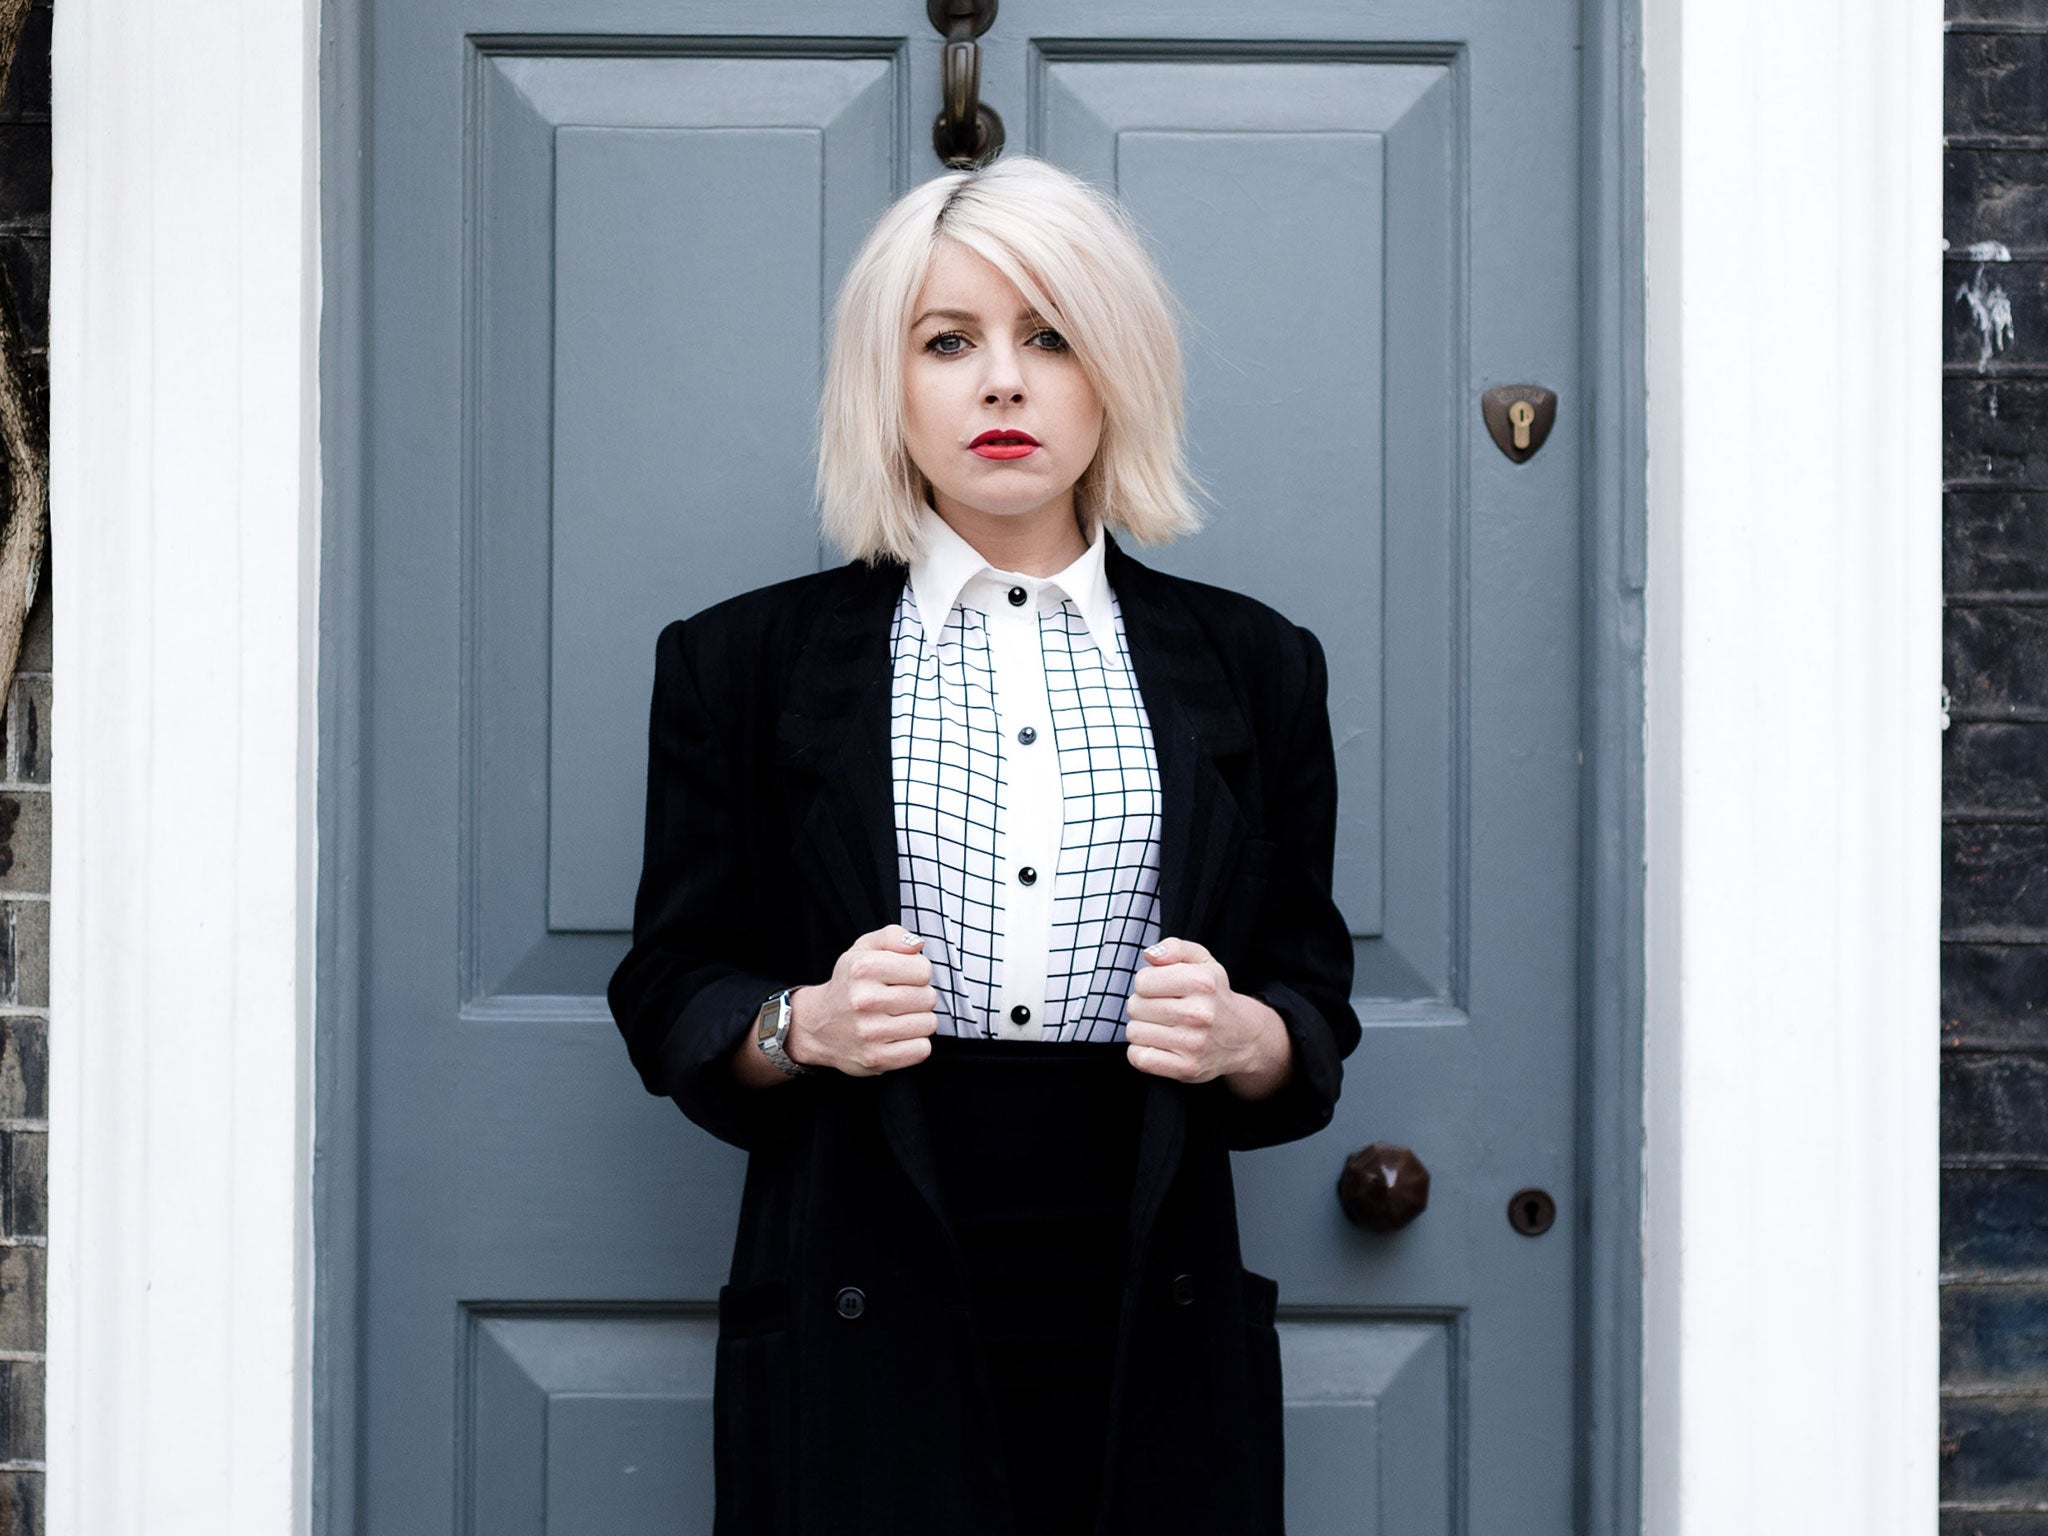 Singer and songwriter Little Boots photographed in High Street Kensington